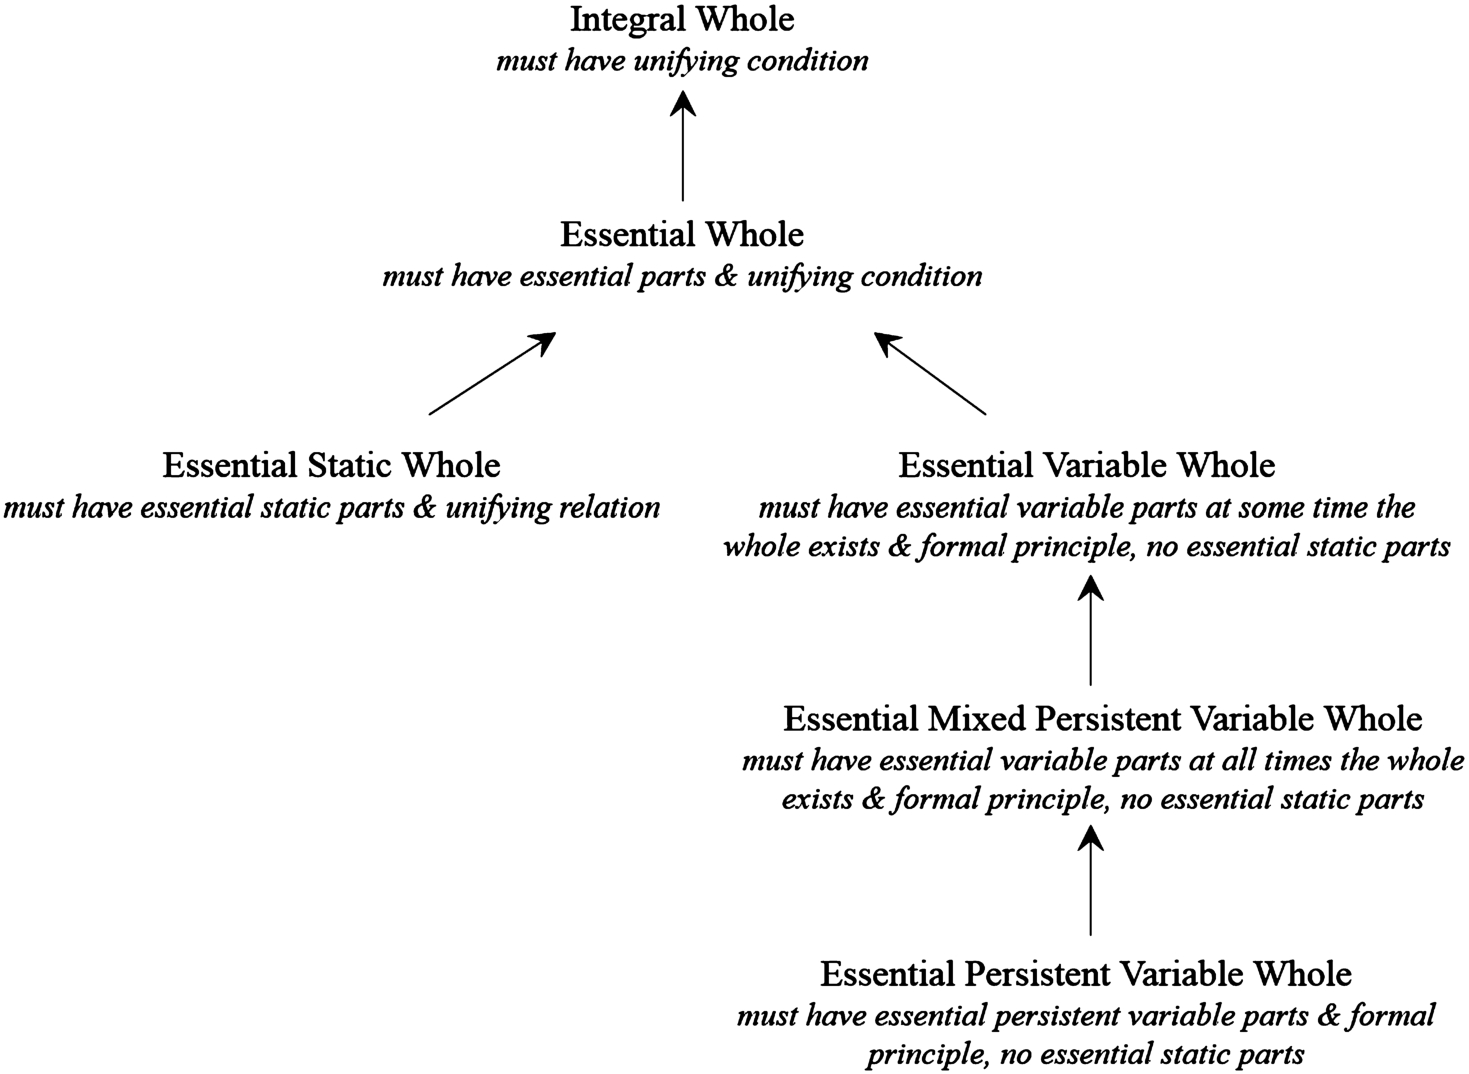 Taxonomy of integral wholes for physical objects.